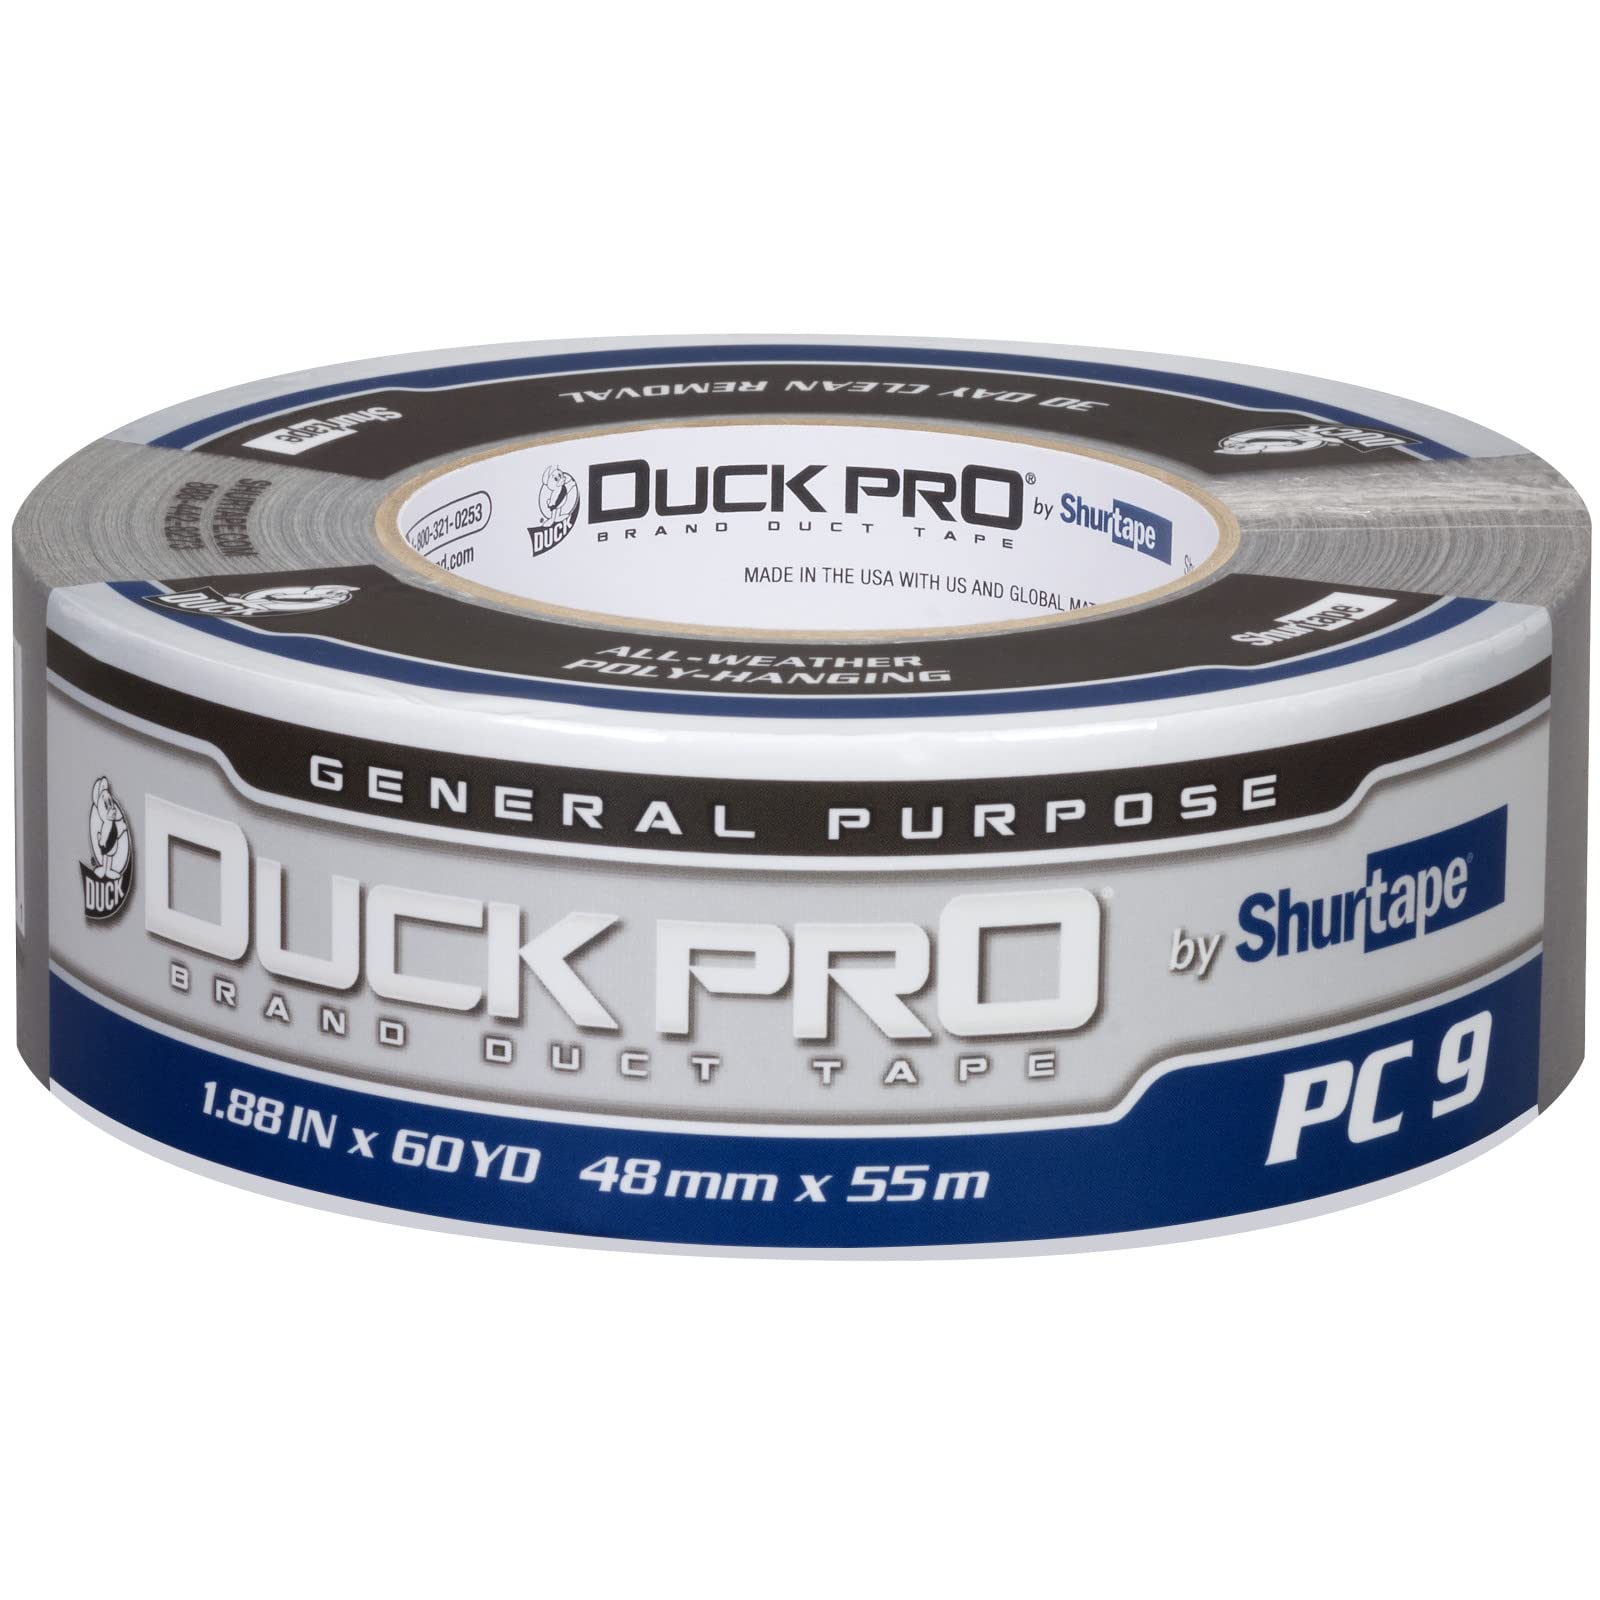 DUCK PRO BY SHURTAPE PC 9 CONTRACTOR GRADE COEXTRUDED DUCT TAPE  SILVER  9.0 MILS  48MM X 55M